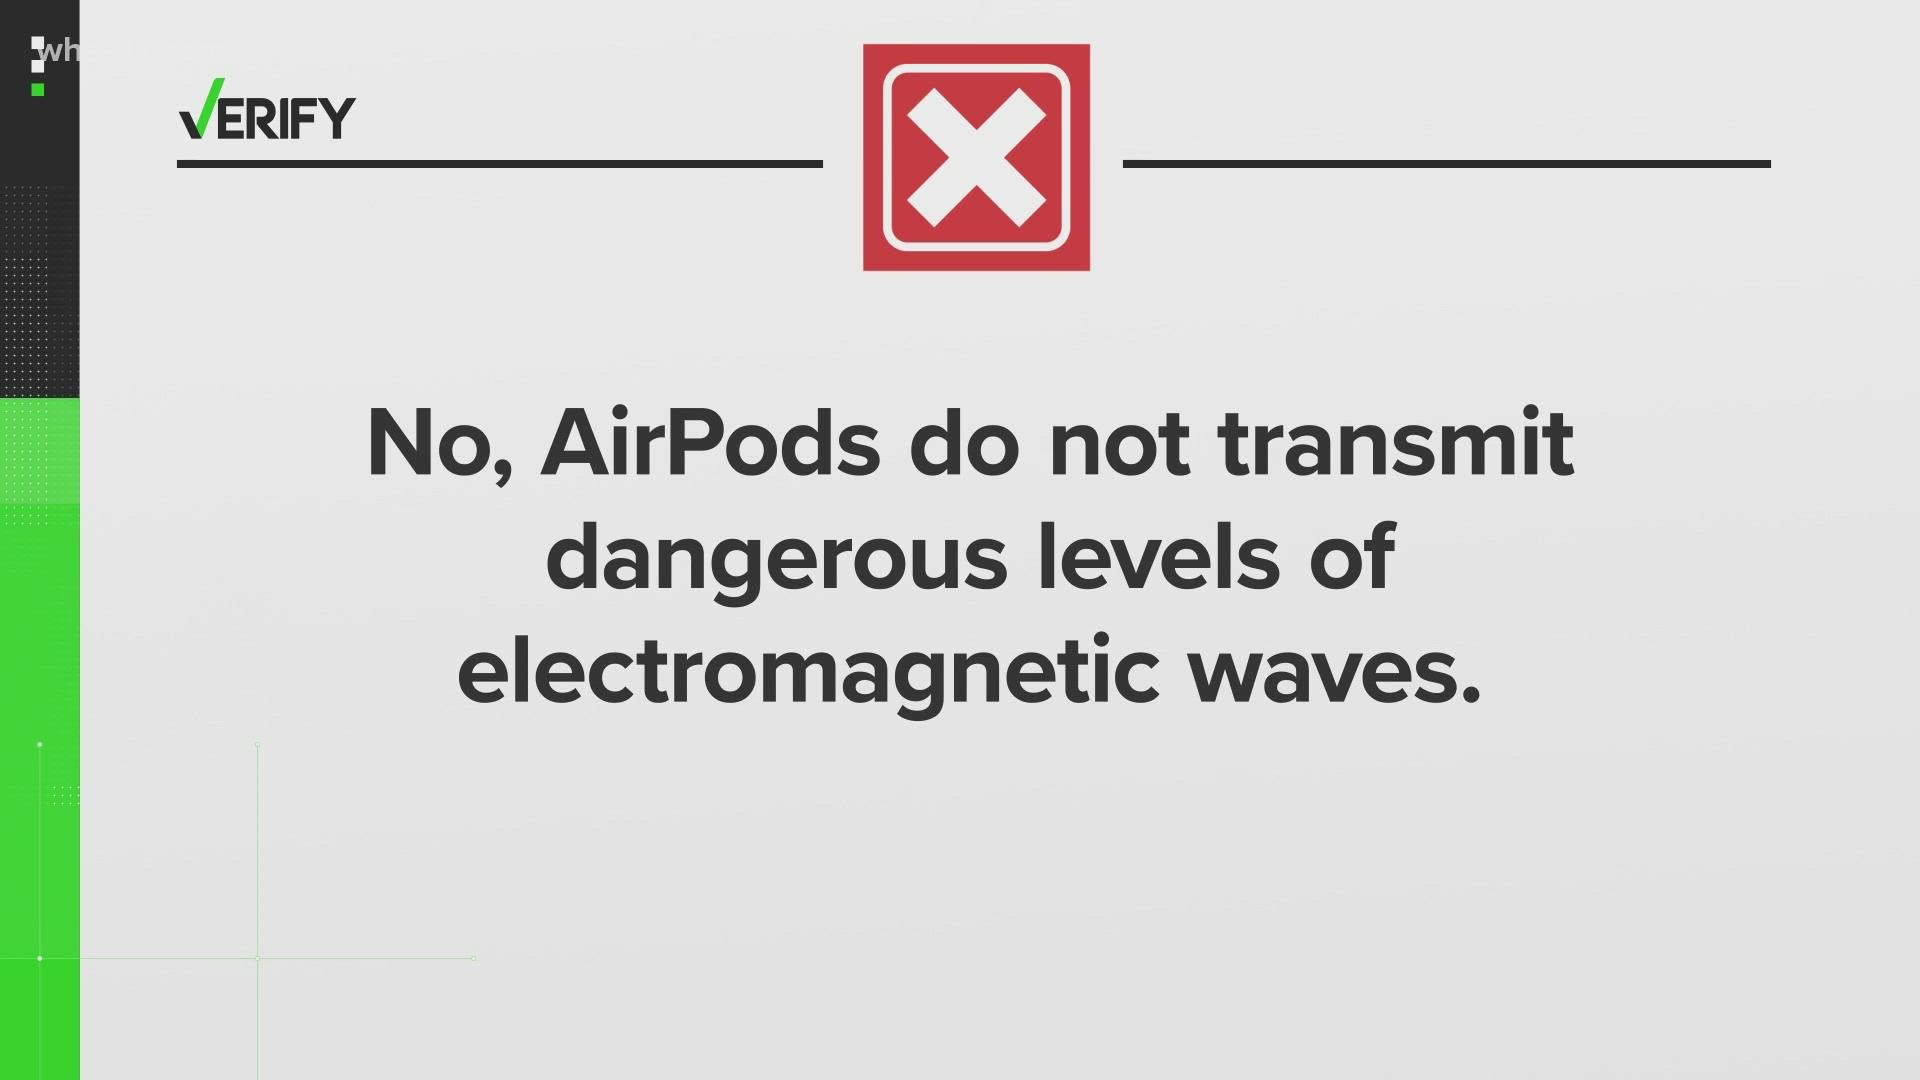 AirPods expose users to electromagnetic waves far below the FCC’s limit, which all wireless devices in the U.S. must follow.